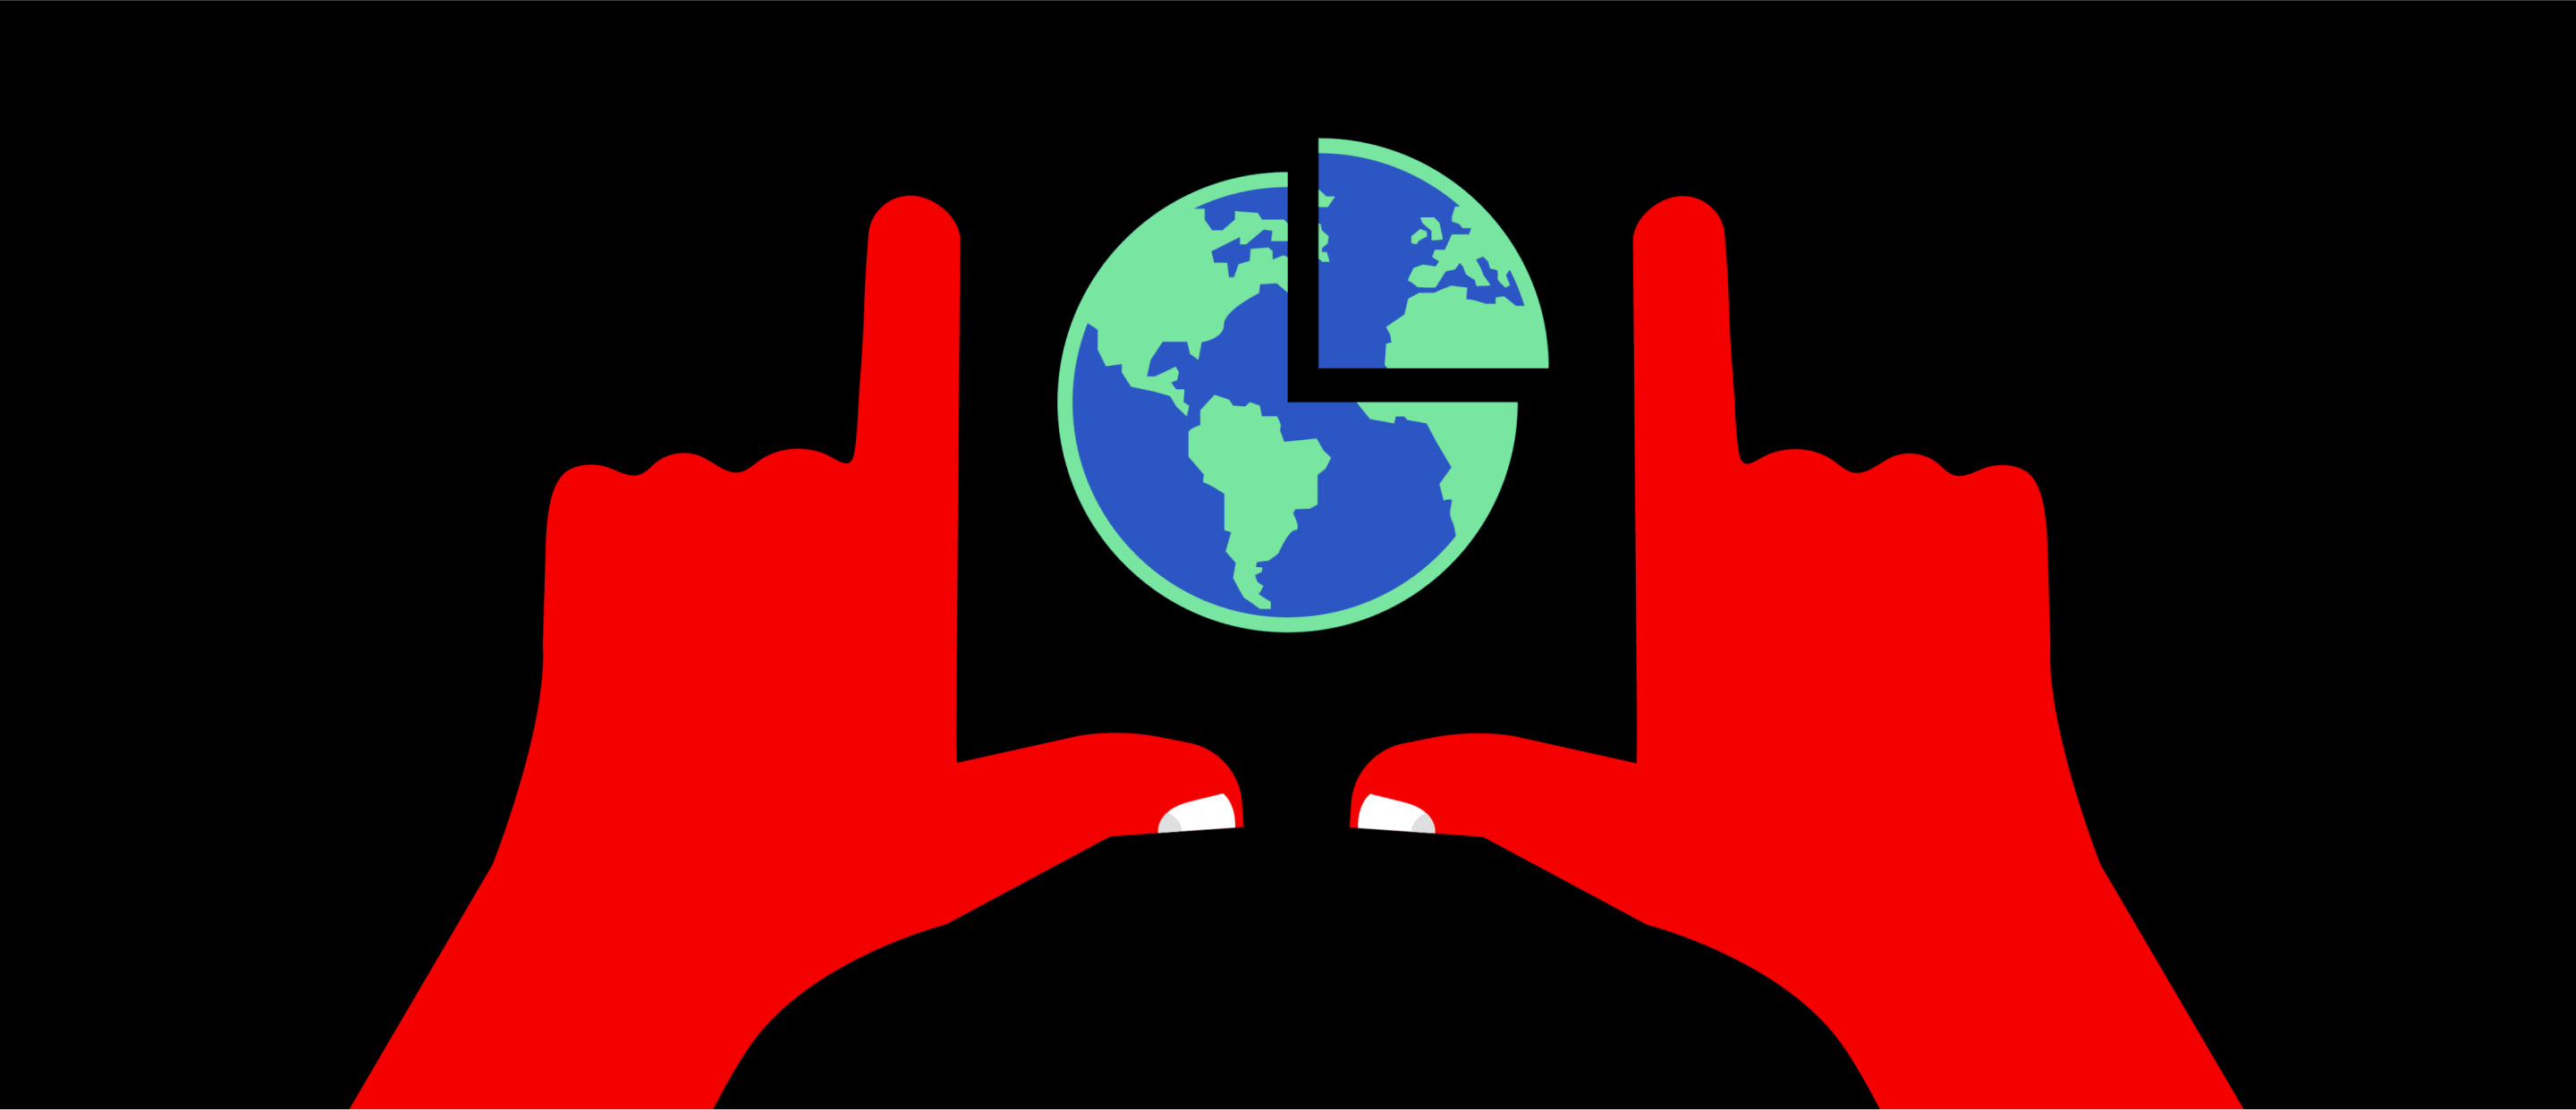 Vector image of two hands framing an image of the earth with a quarter wedge taken out of it